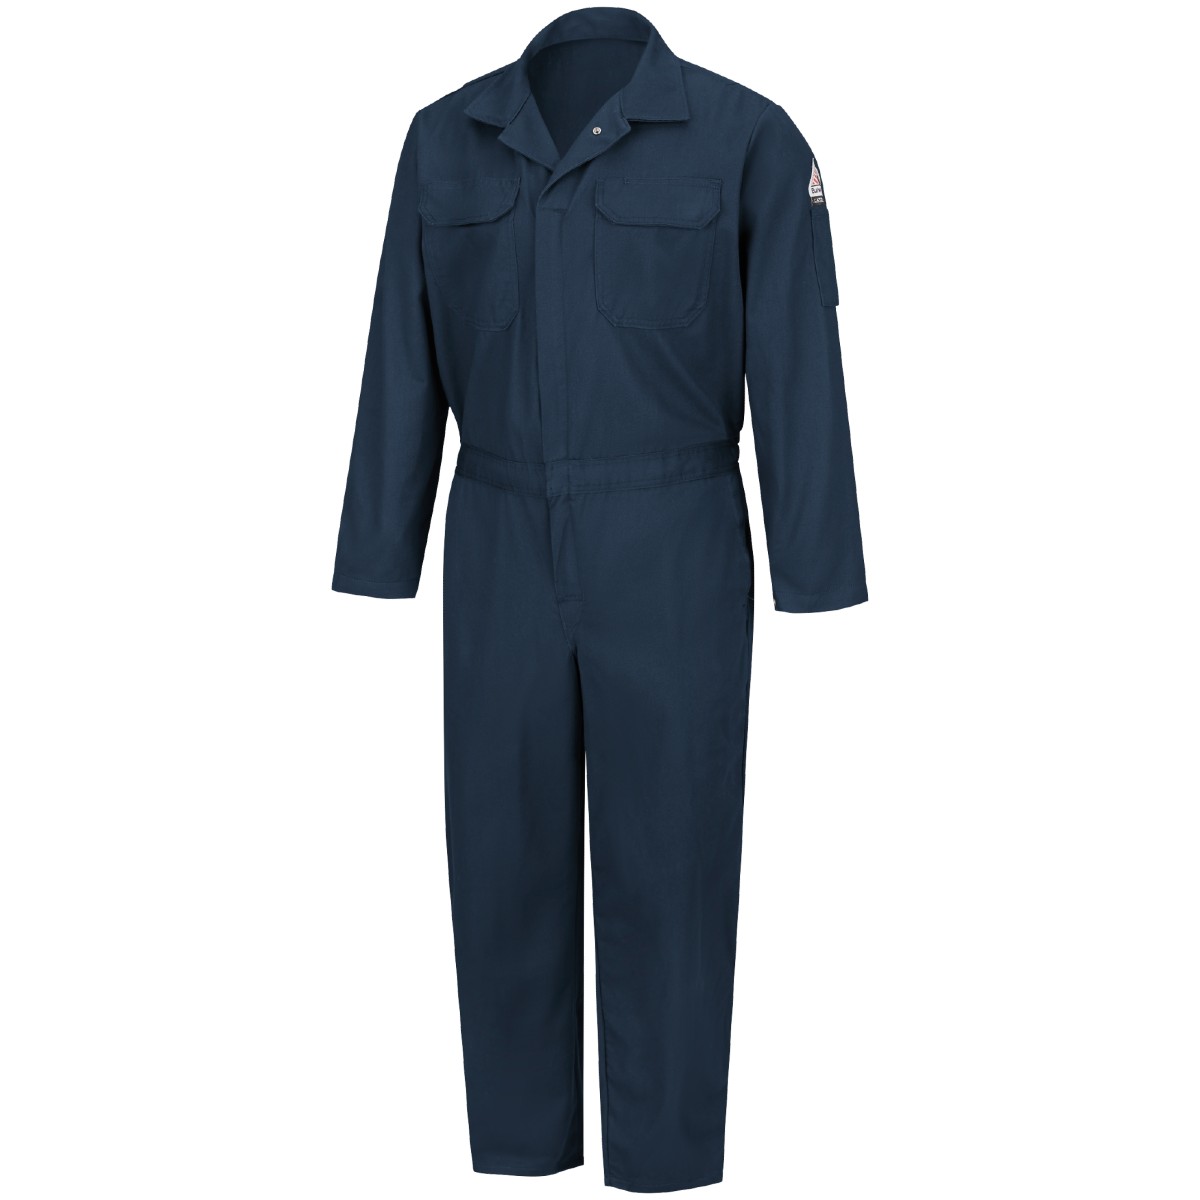 Bulwark Deluxe 6 oz NOMEX Coverall in Navy